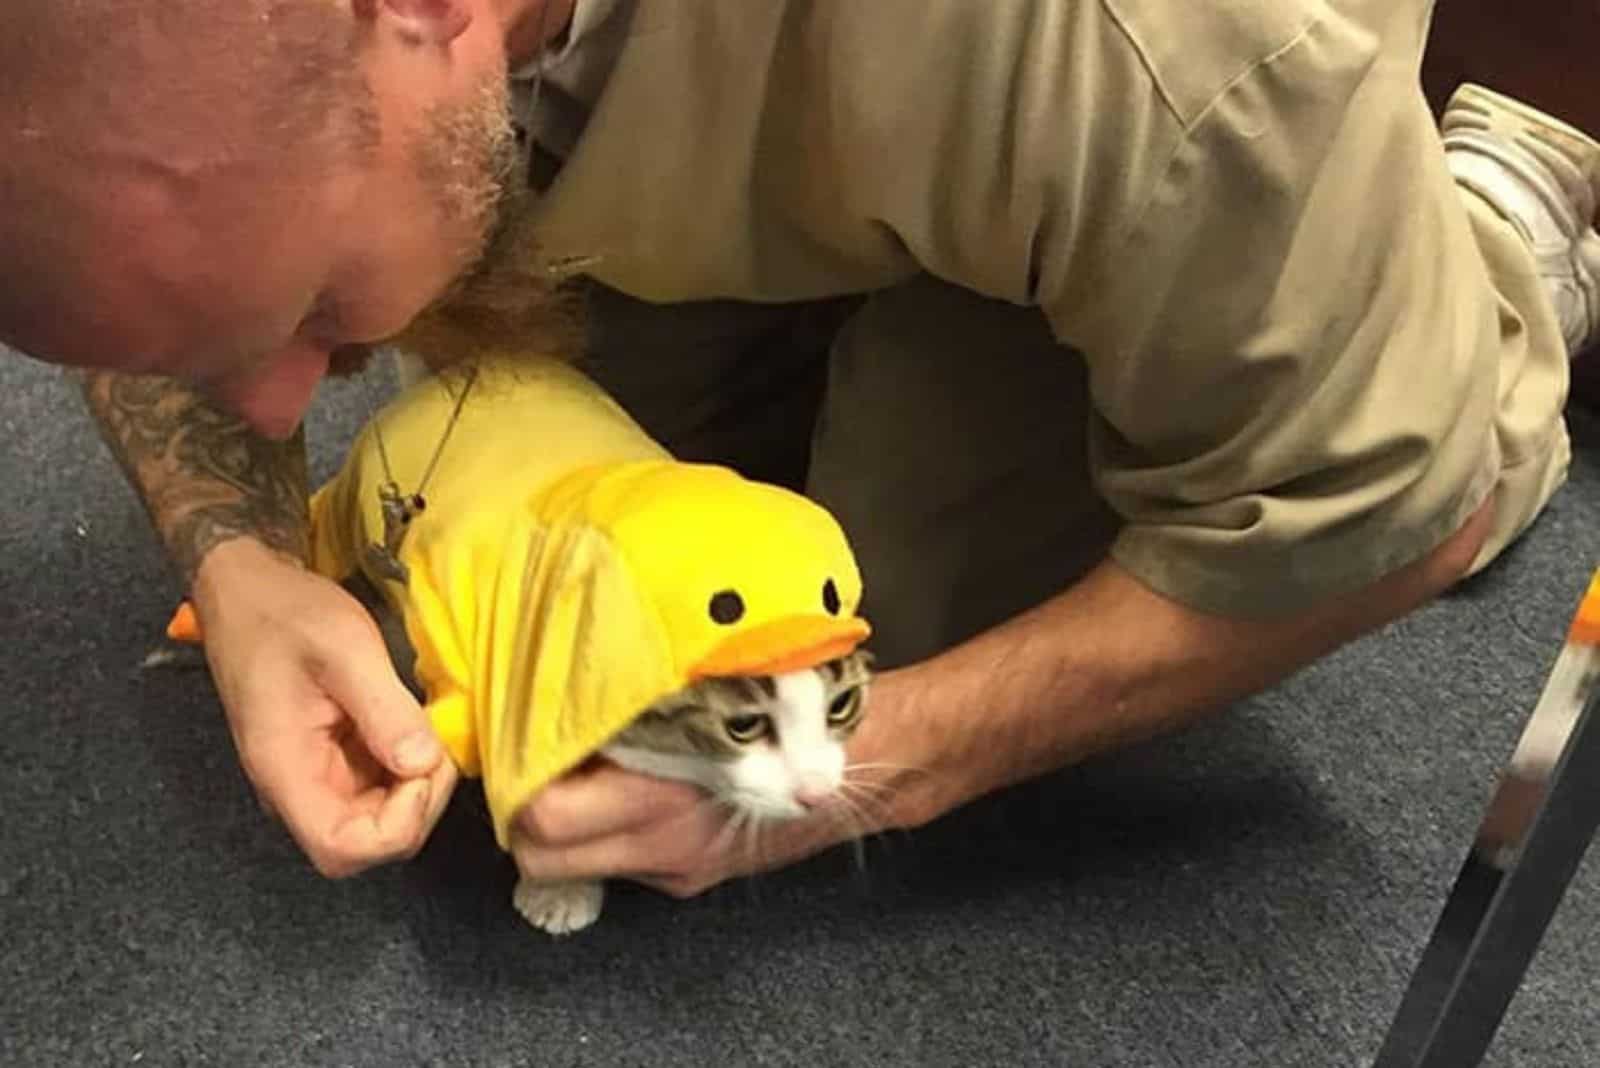 Man and cat with duck costume